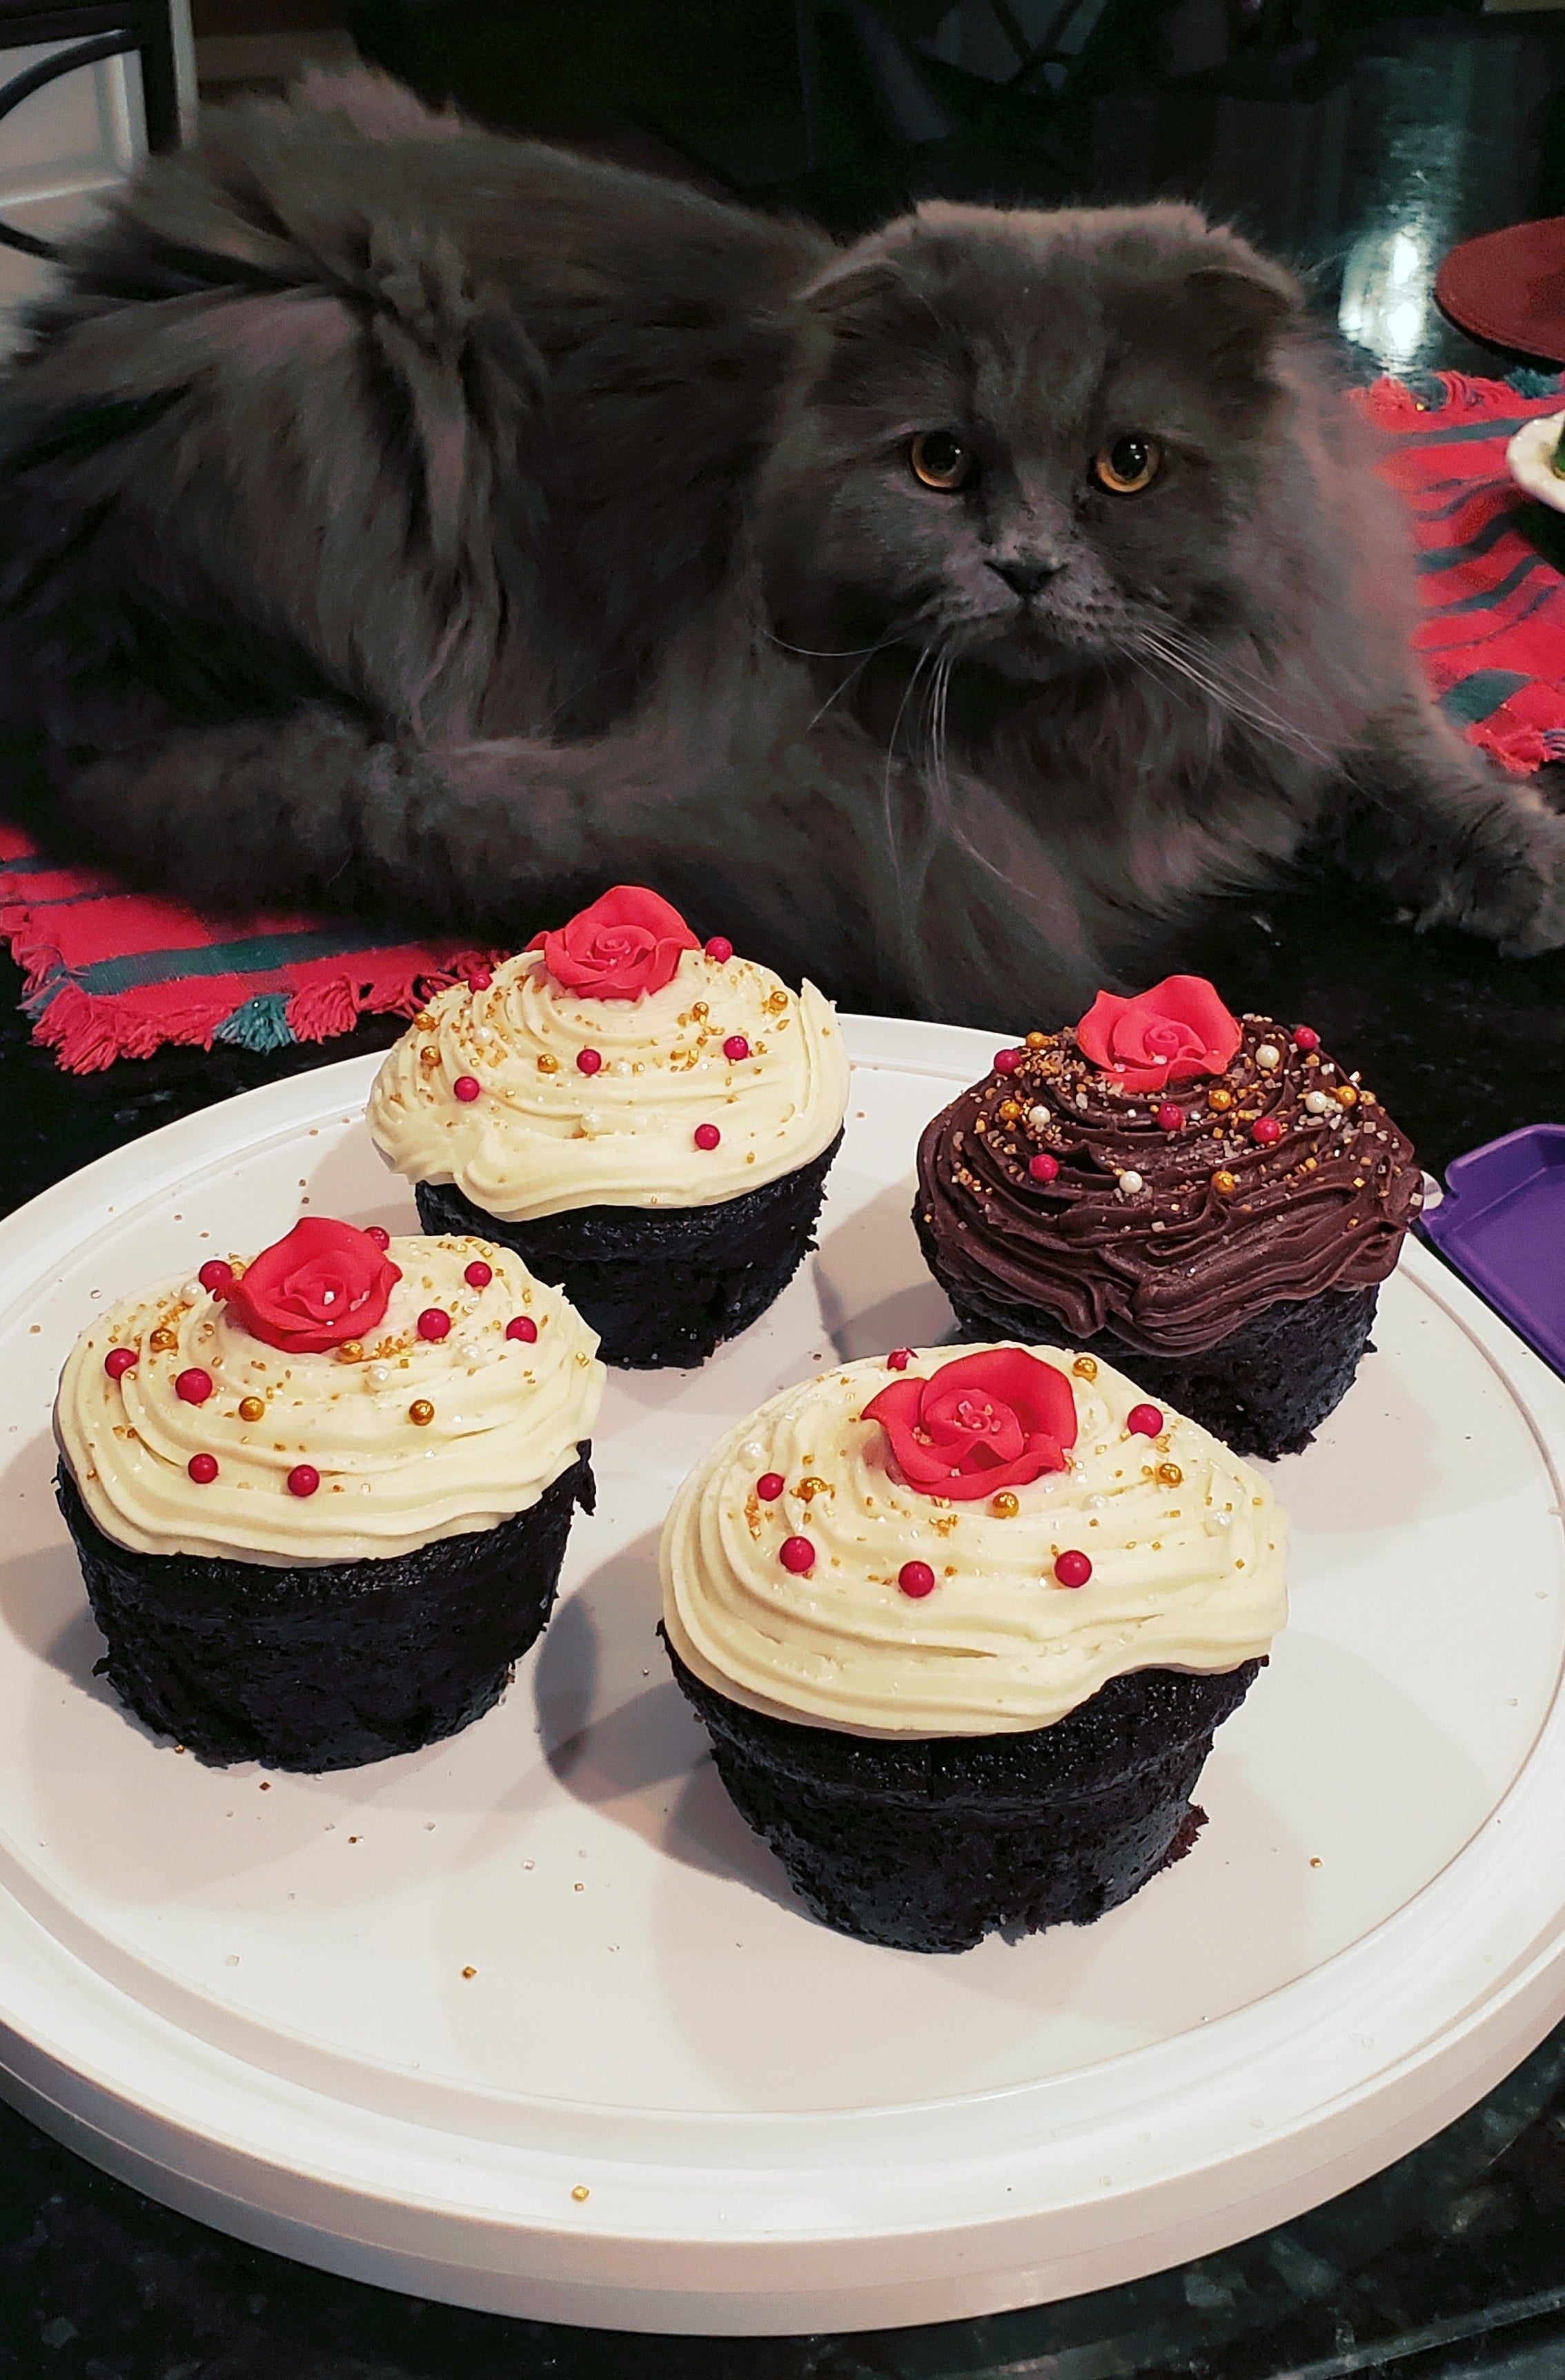 A fluffy, long-haired cat sits behind a plate with four decorated cupcakes, two with white frosting and two with brown toppings